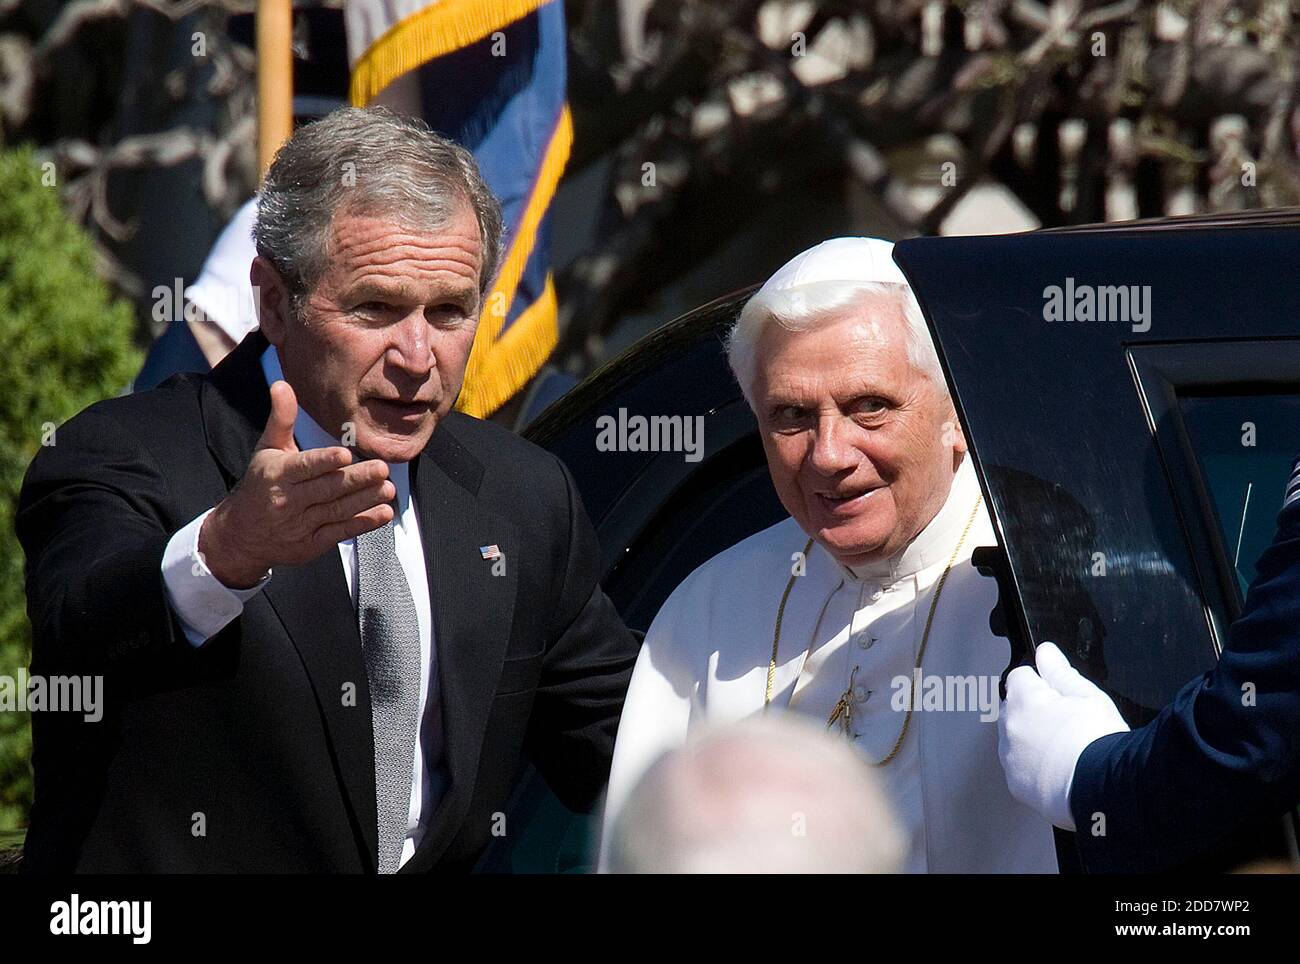 NO FILM, NO VIDEO, NO TV, NO DOCUMENTARY - U.S. President George W. Bush welcomes Pope Benedict XVI to the South Lawn of the White House in Washington, DC, on April 16, 2008. Photo by Chuck Kennedy/MCT/ABACAPRESS.COM Stock Photo